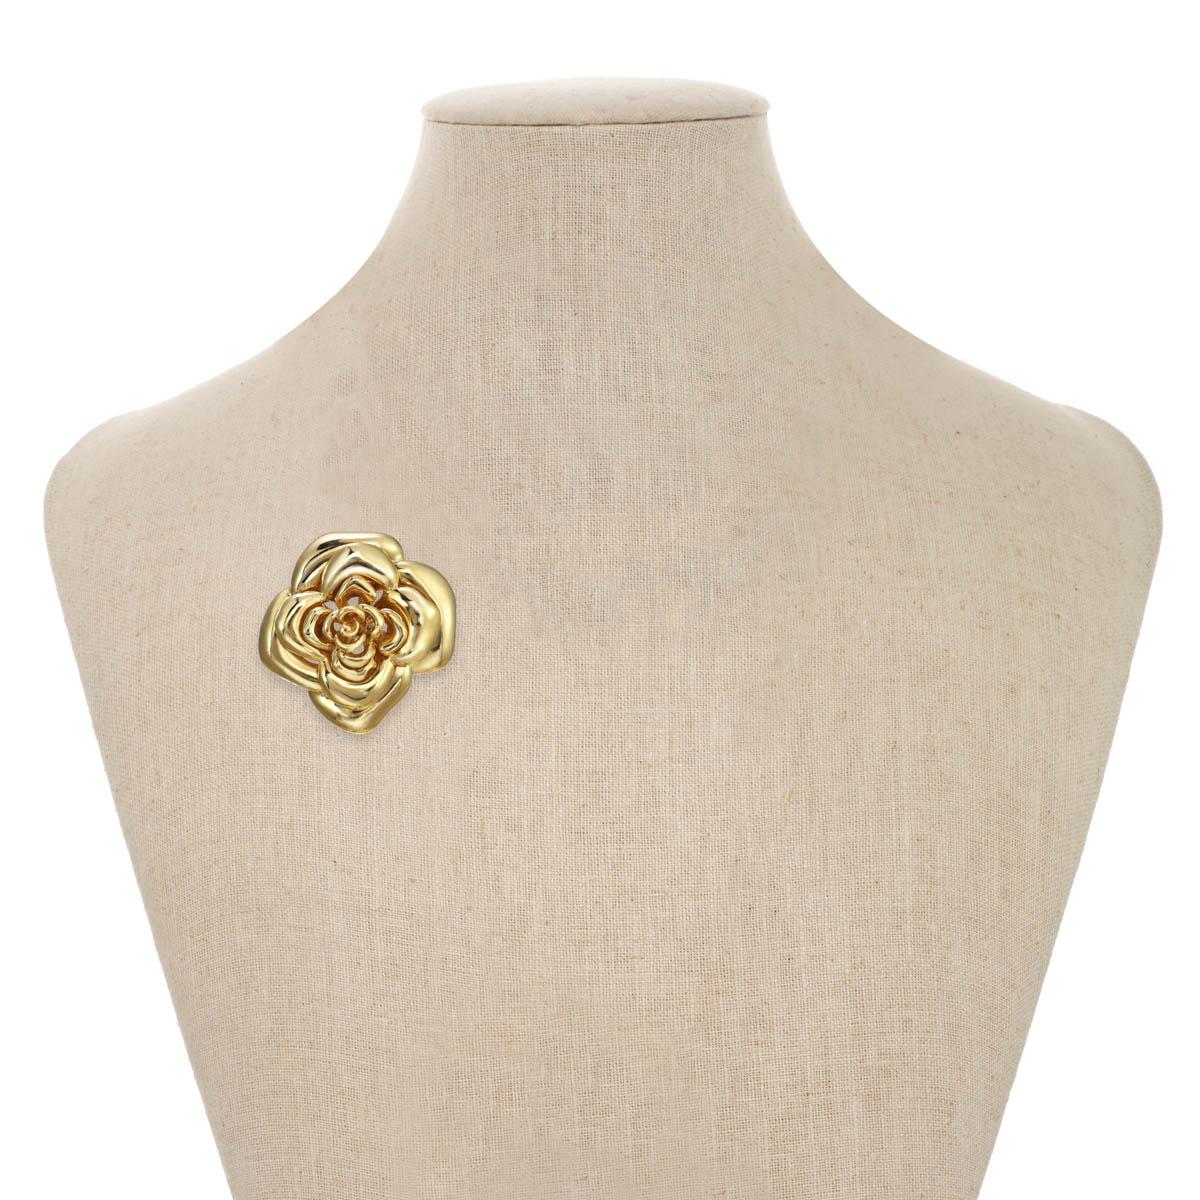 Bold and beautiful! This polished blooming rose pin will be stunning on your jacket as you transition from summer to fall! So chic, we are in love!
Materials:
Pewter
18K Gold Plating
Brass Pin and Catch
Dimensions: 
Length:2 1/2